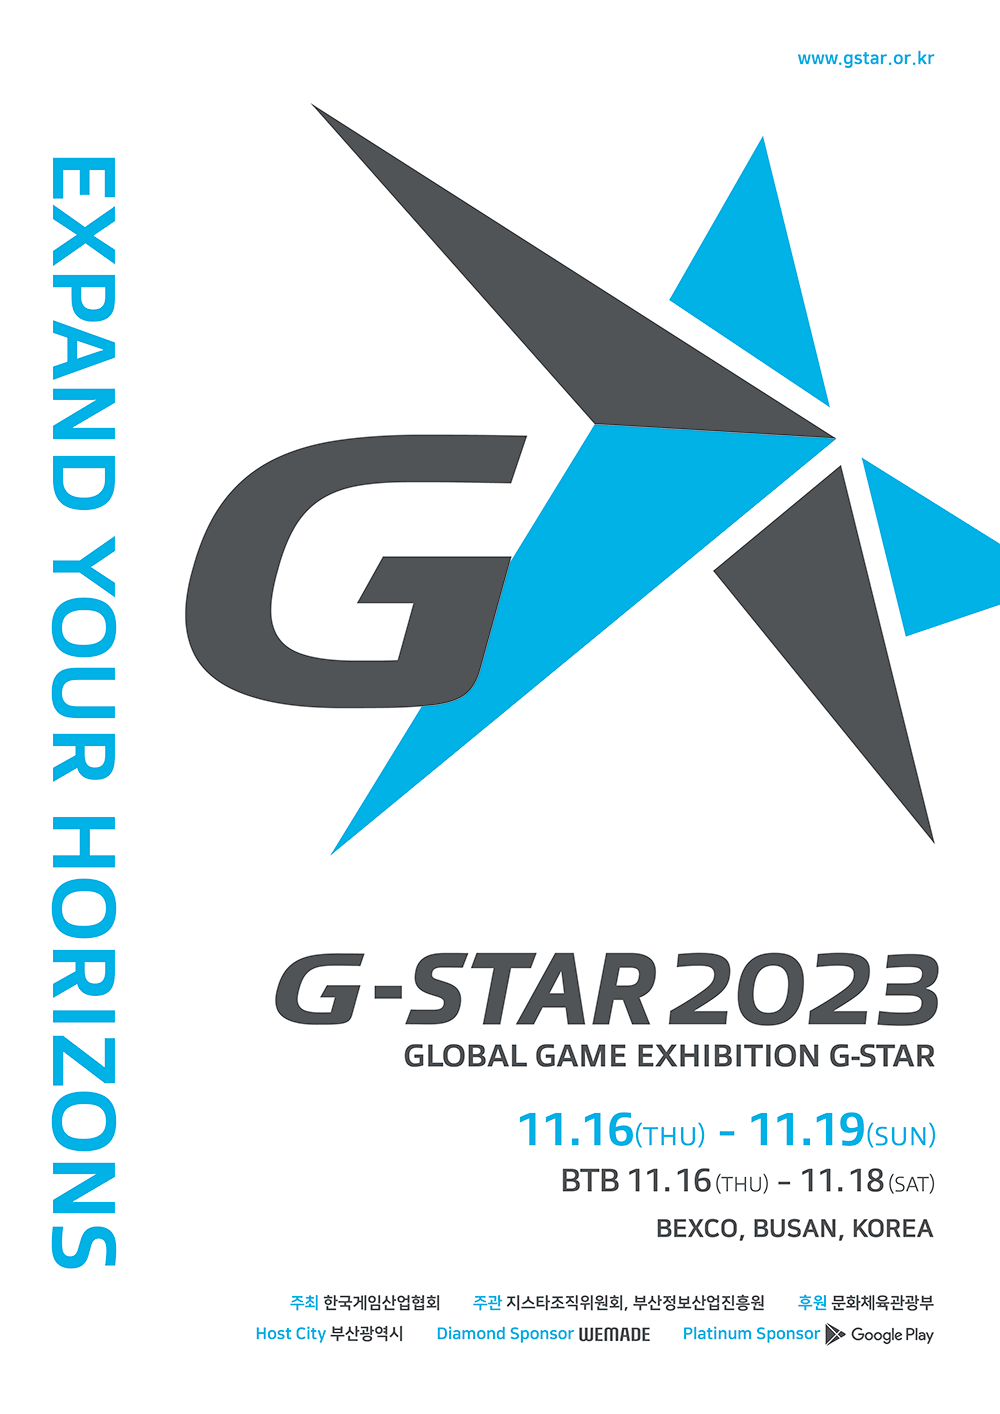 Global Game Exhibition G-STAR 2023